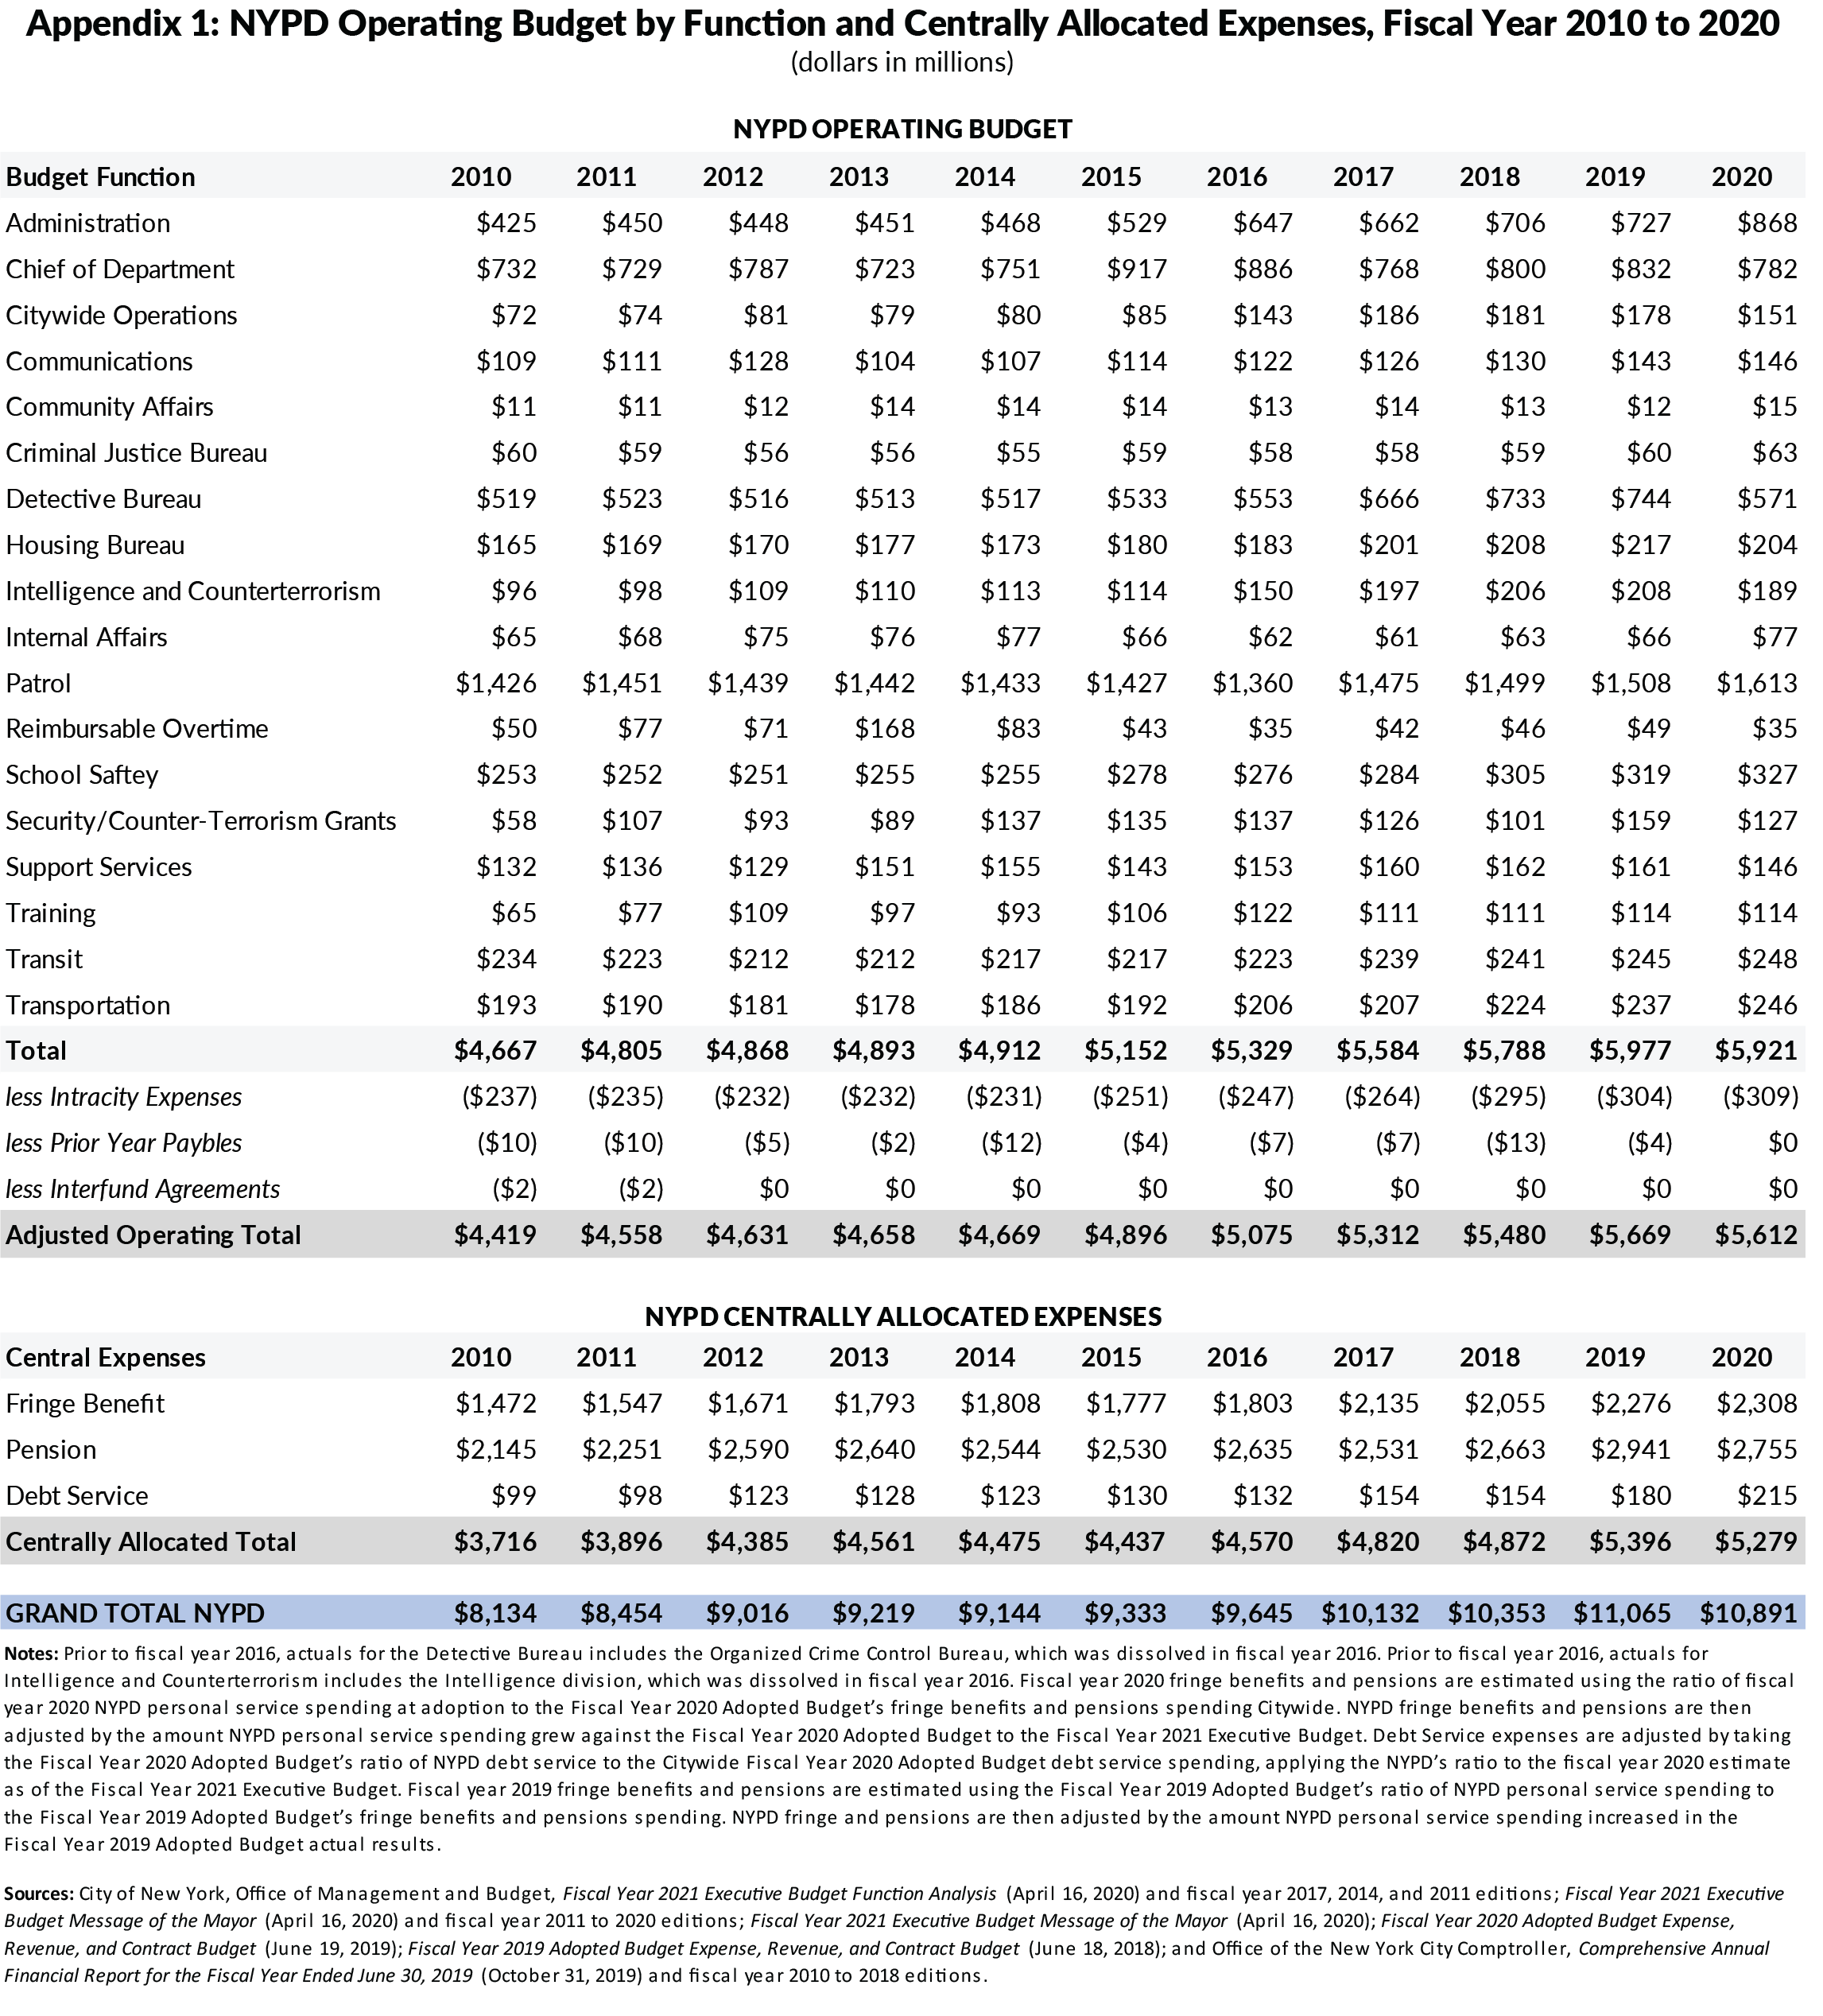 Appendix 1: NYPD Operating Budget by Function and Centrally Allocated Expenses, Fiscal Year 2010 to 2020